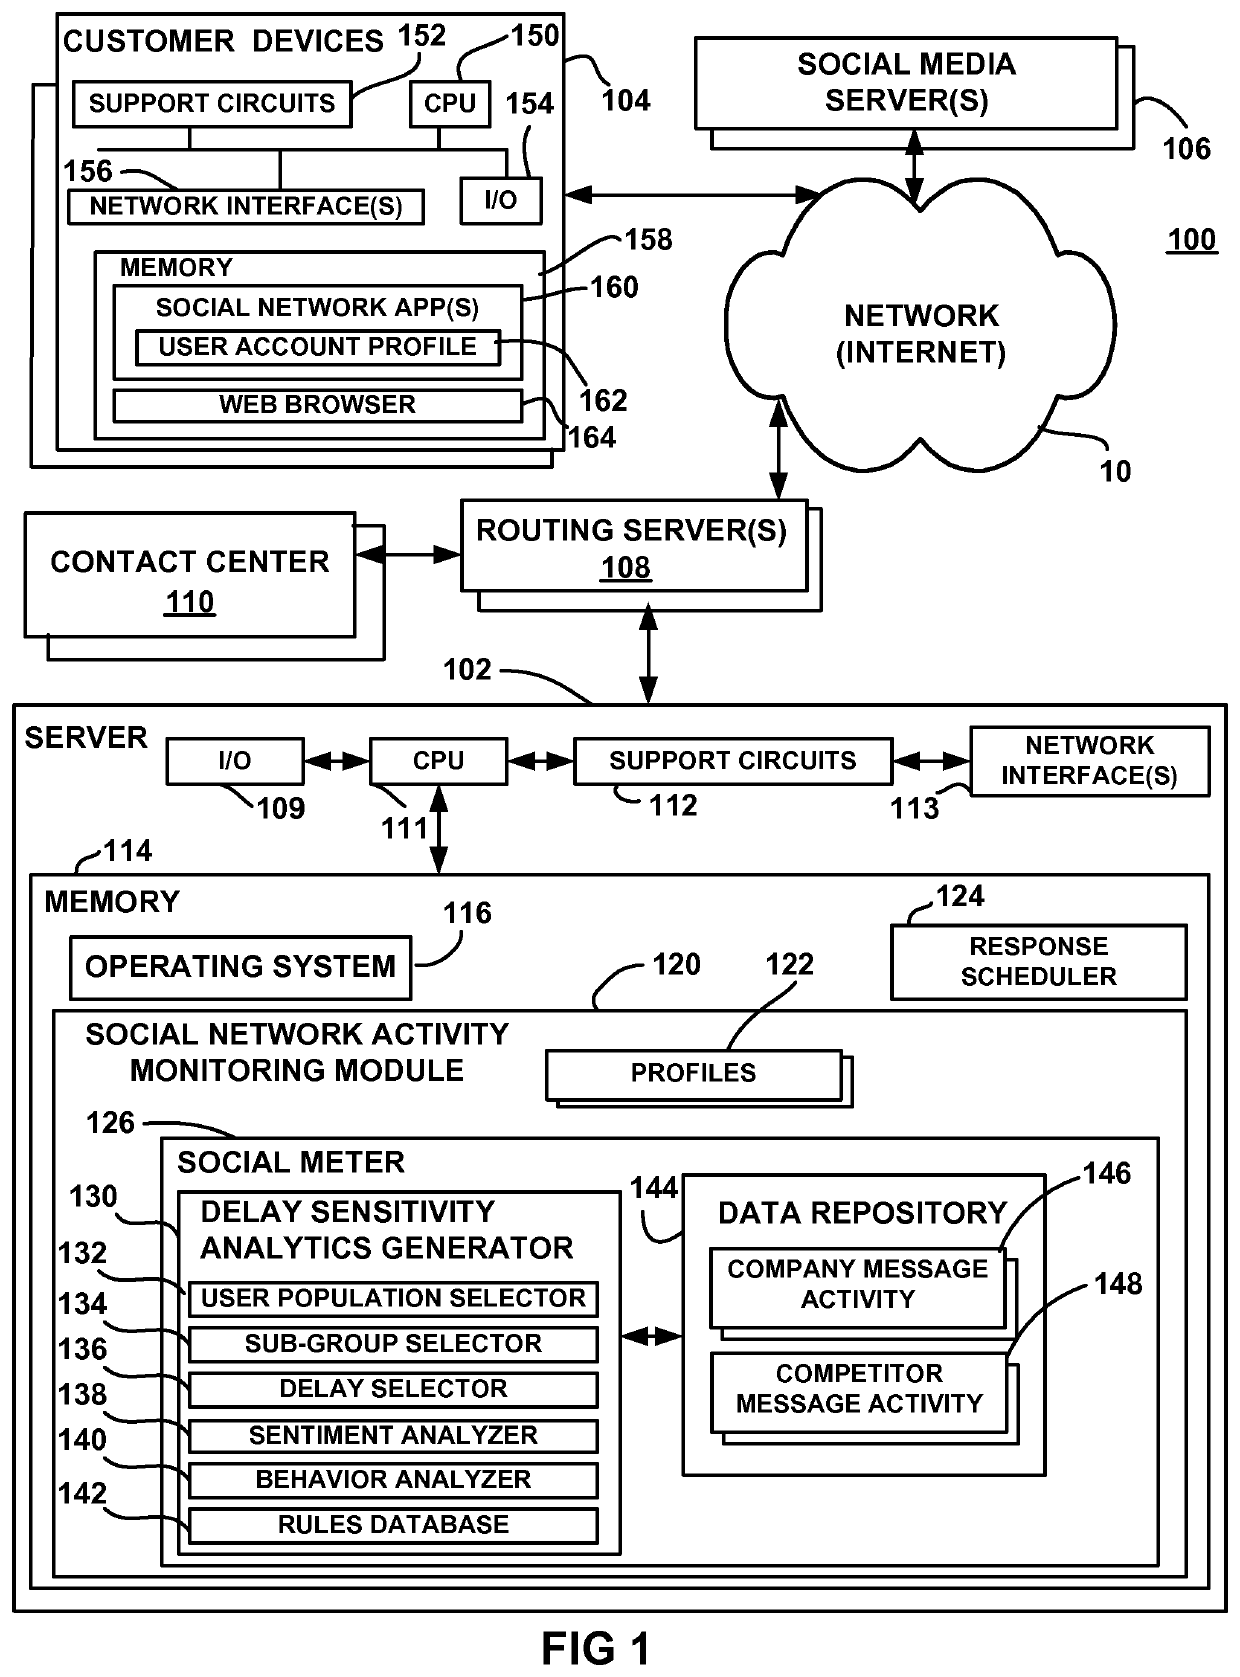 System and method for assessing the sensitivity of social network user populations to response time delays